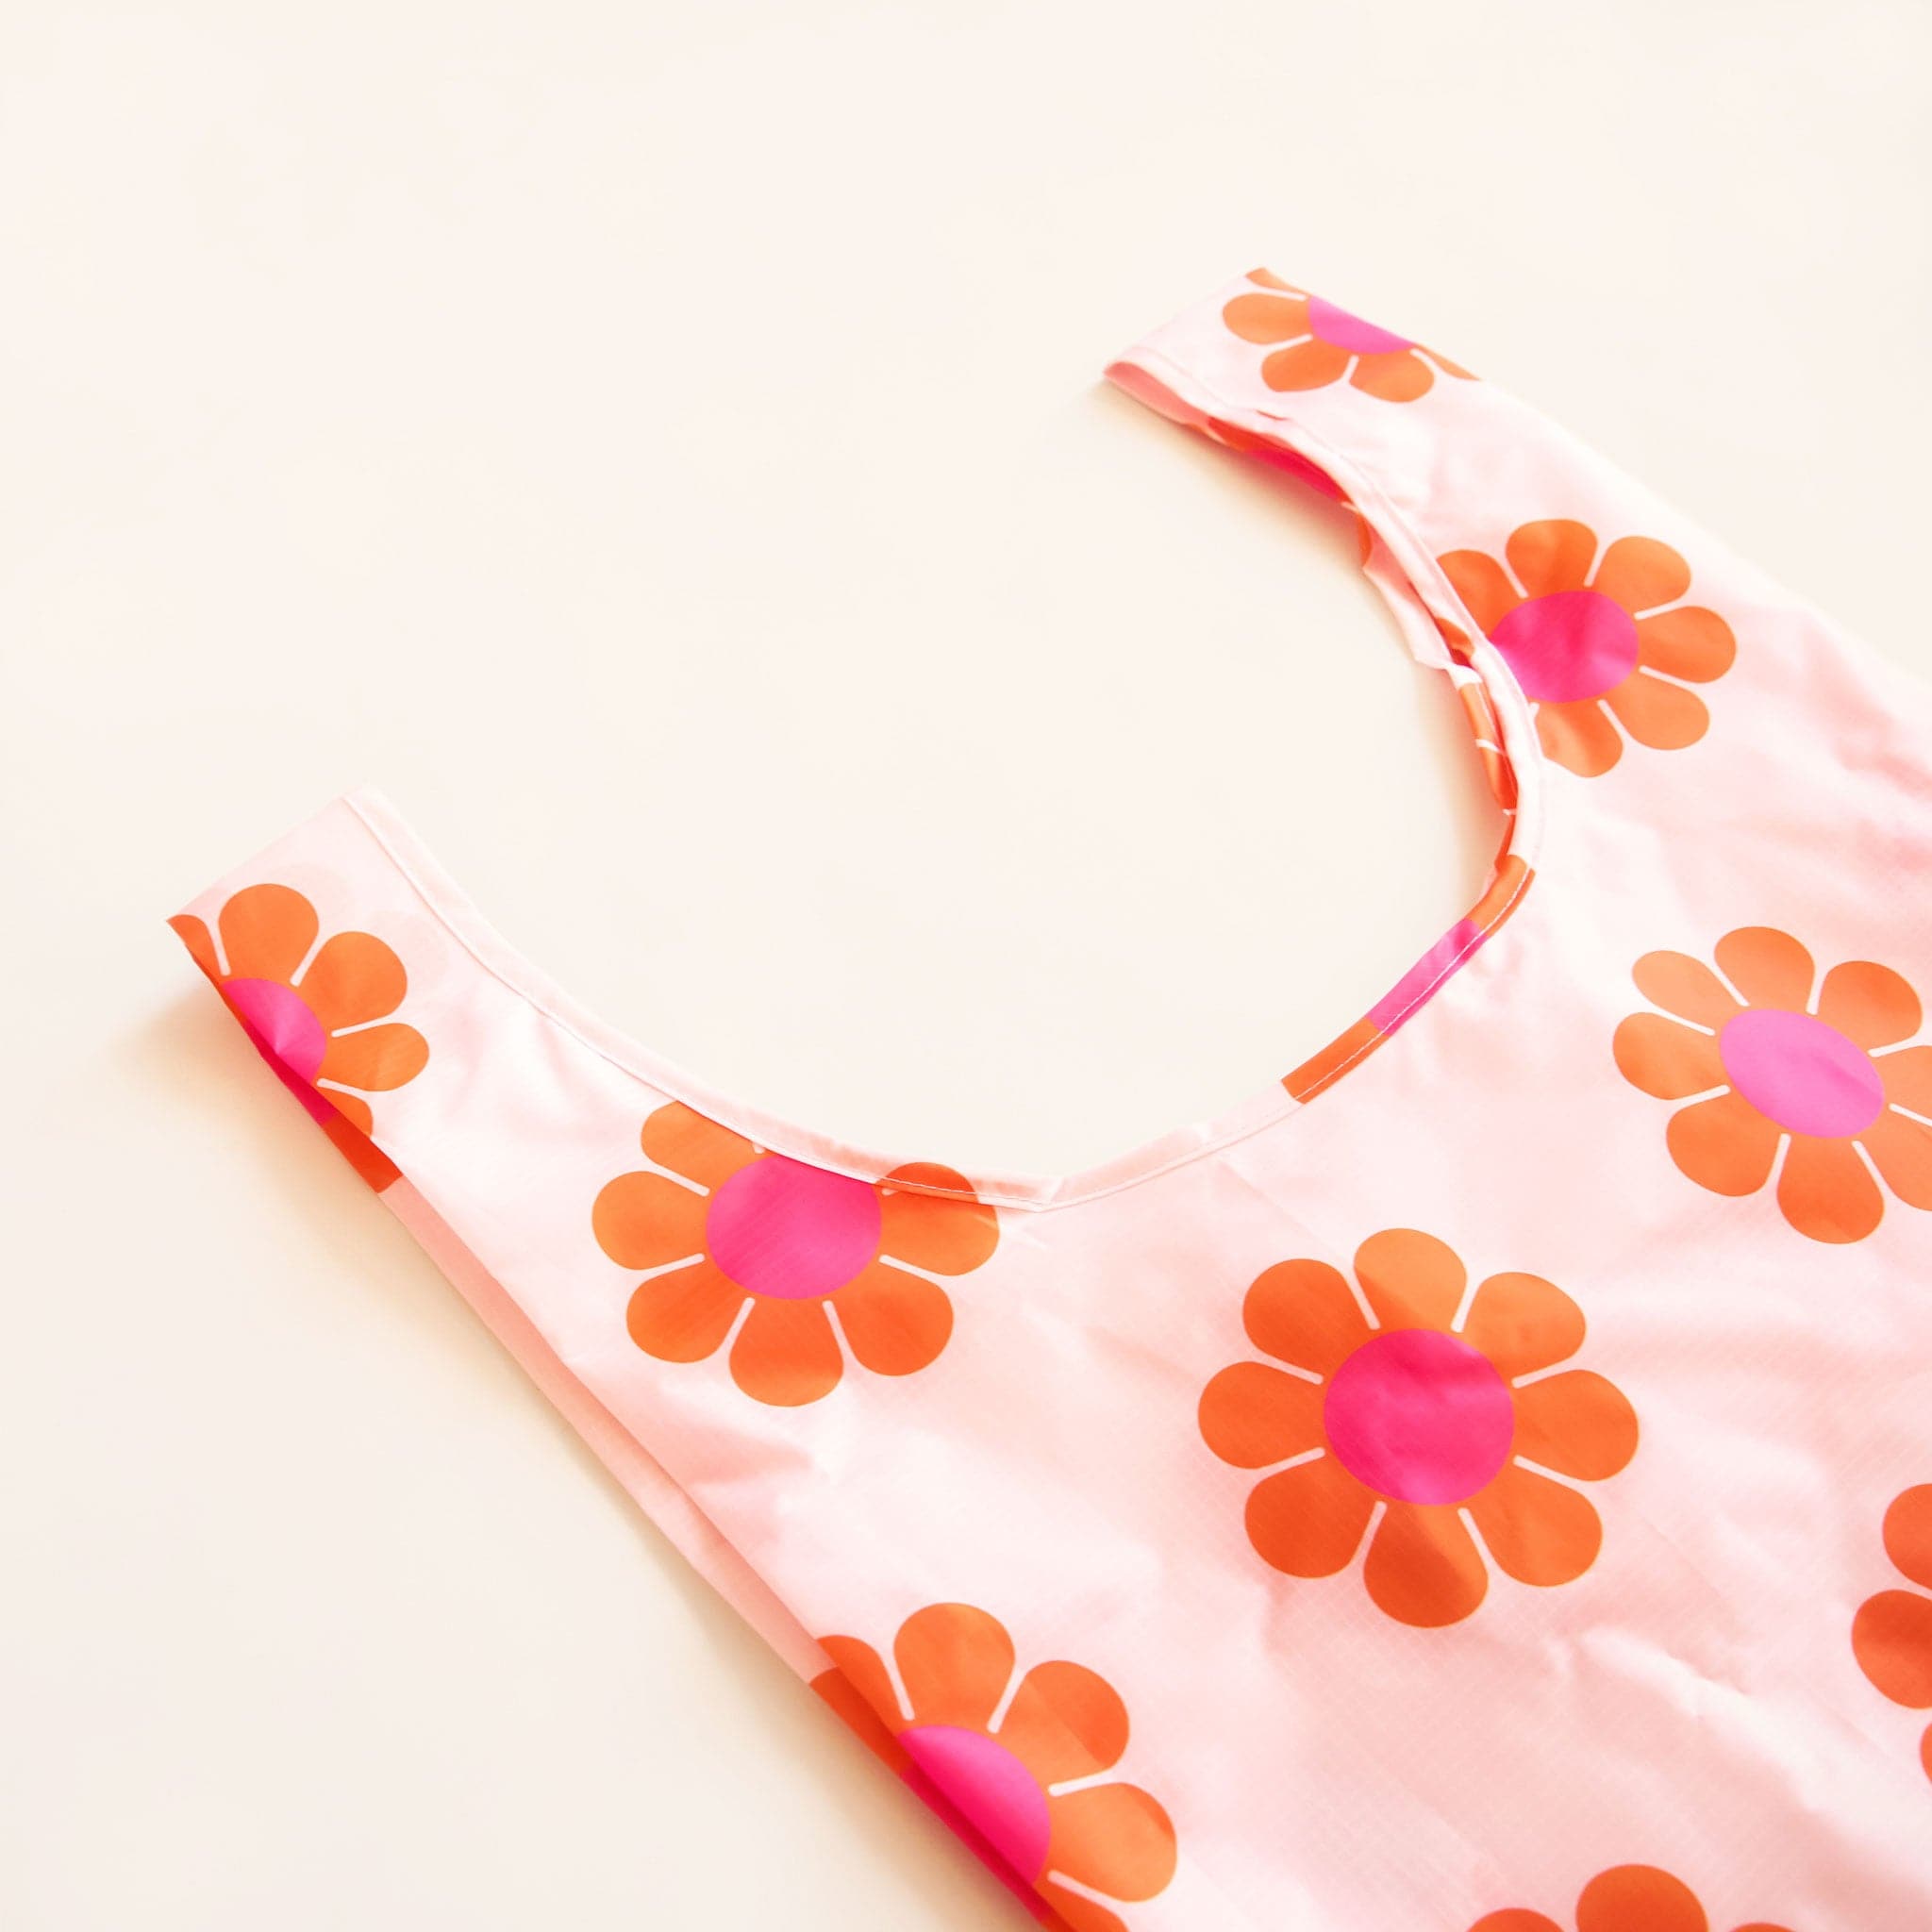 Zoomed in view of peach reusable bag covered in a print of simple flowers with red-orange petals and magenta centers. The bag is positioned flat on a table and has a 'U' shape between two handles.